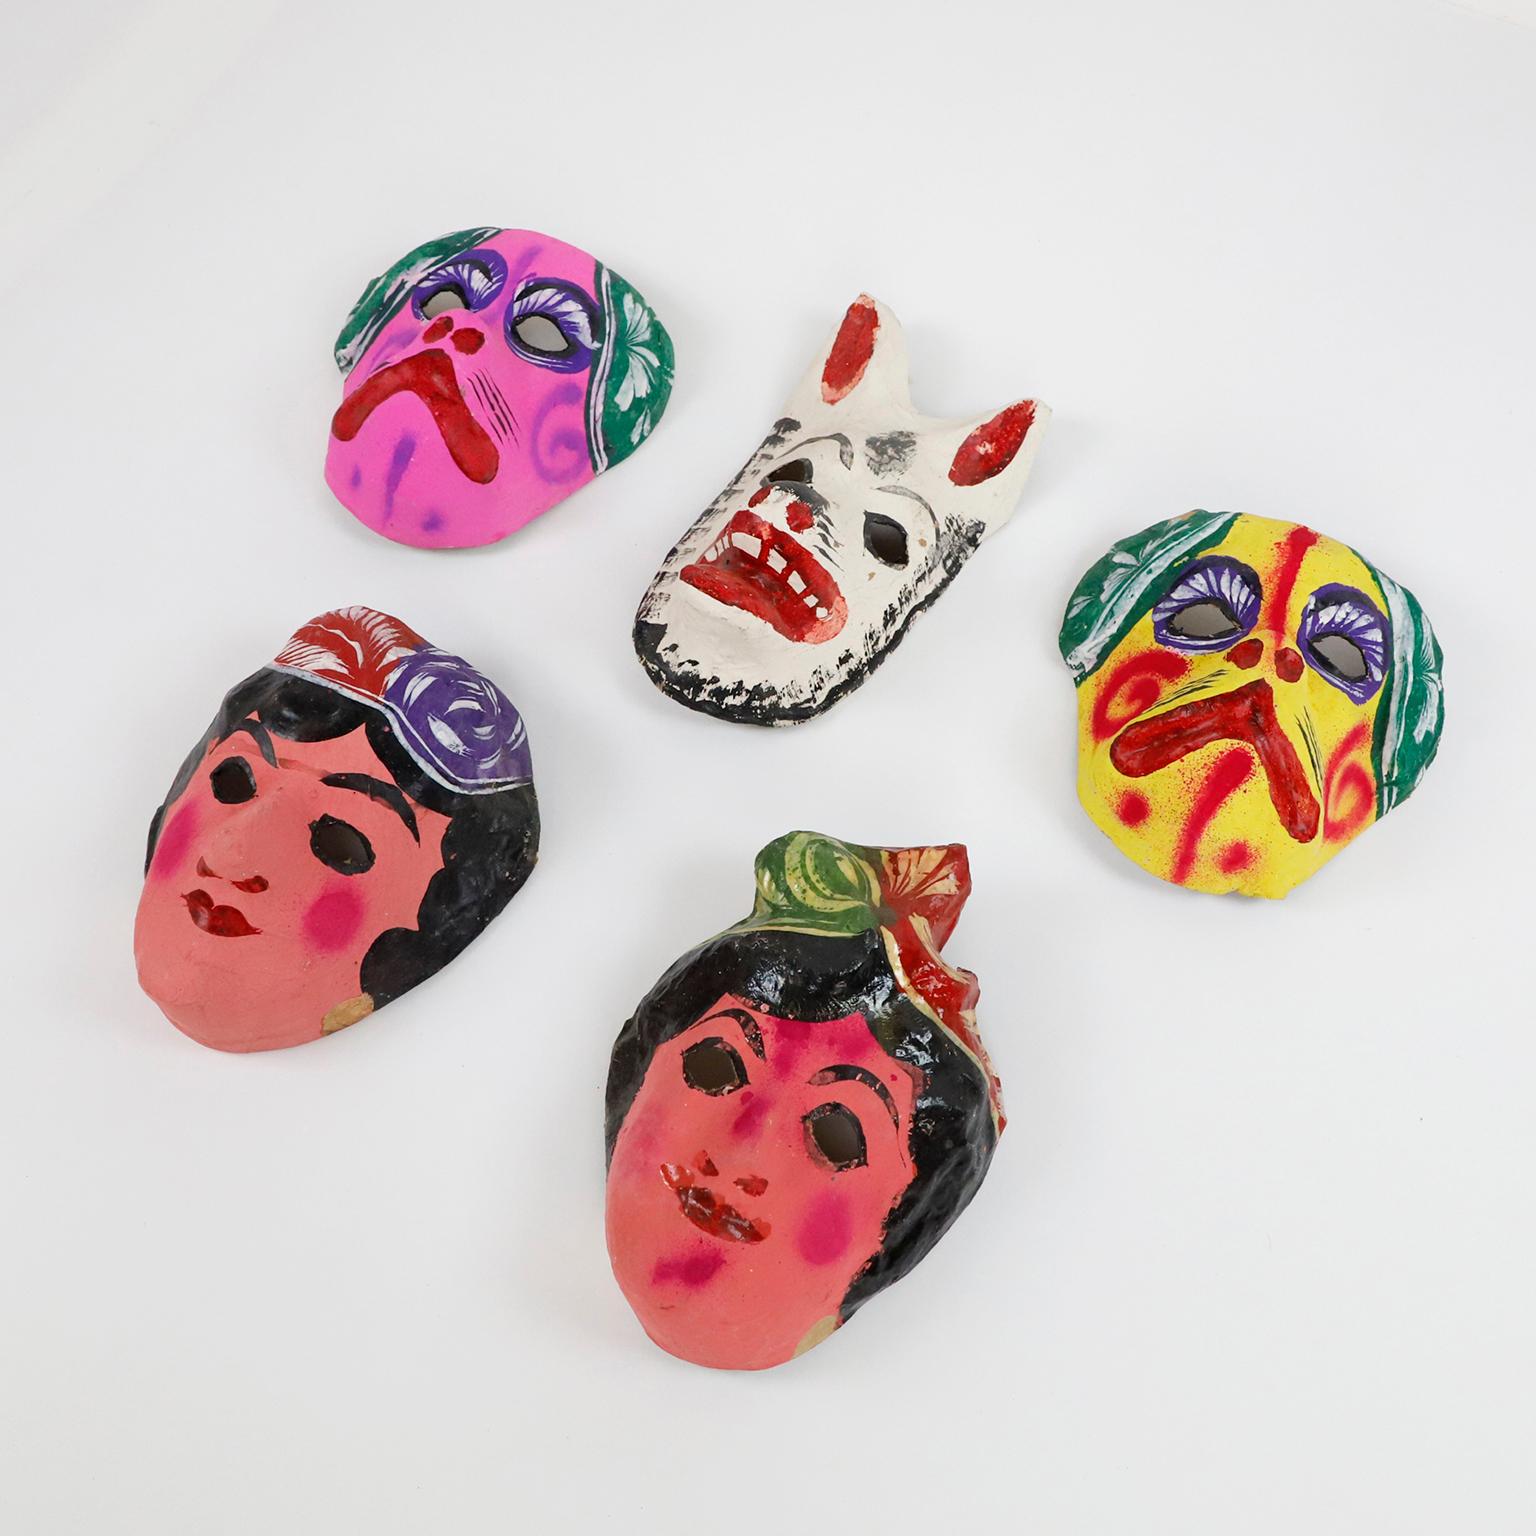 Circa 1960. We offer this antique set of 5 Mexican papier-mâché masks 100% handmade and paited with anilina (natural pigments).